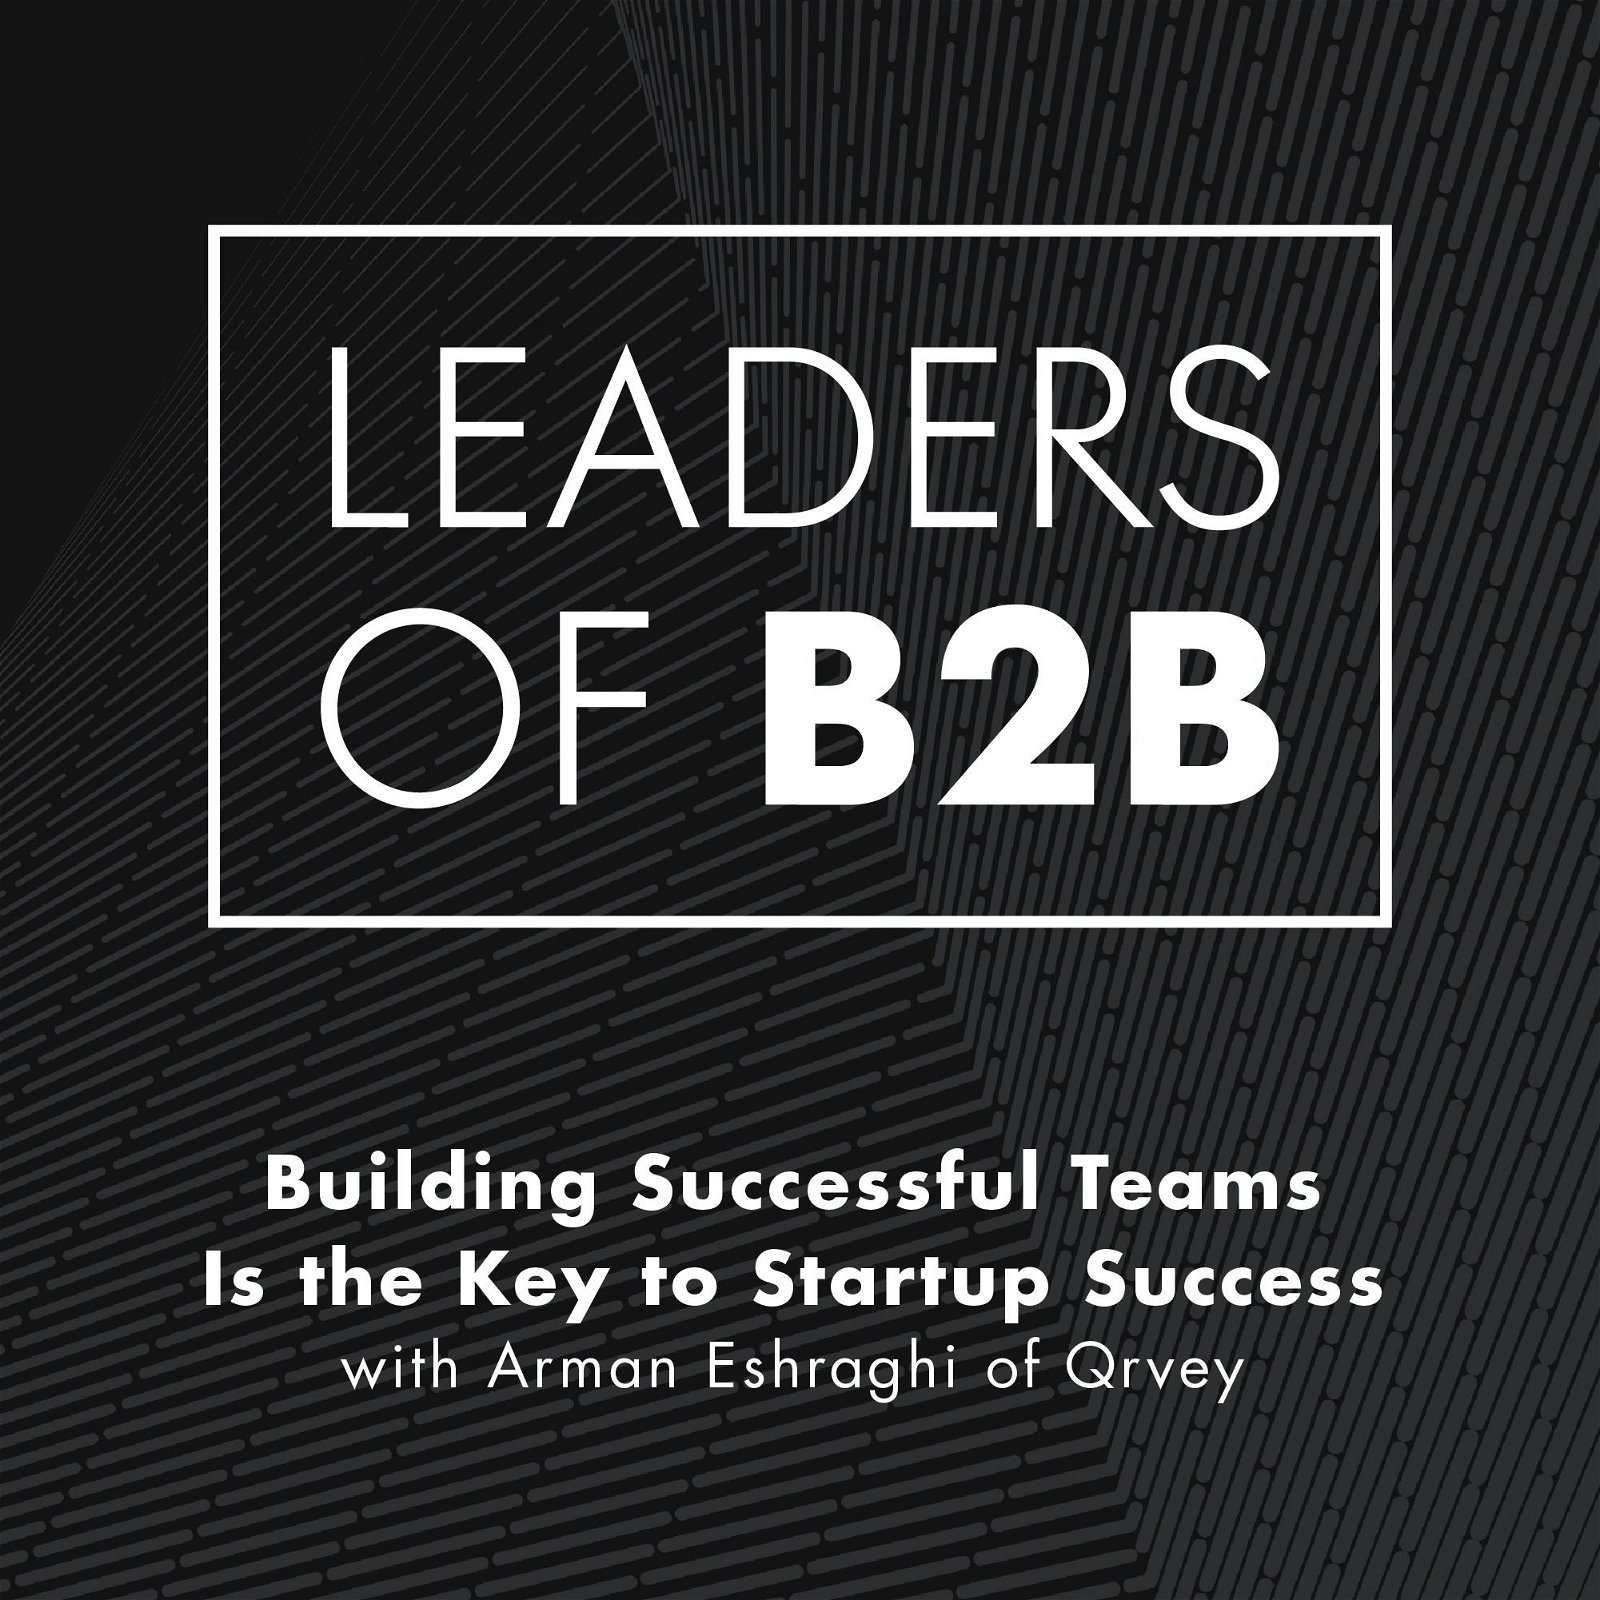 Building Successful Teams is the Key to Startup Success with Arman Eshraghi of Qrvey